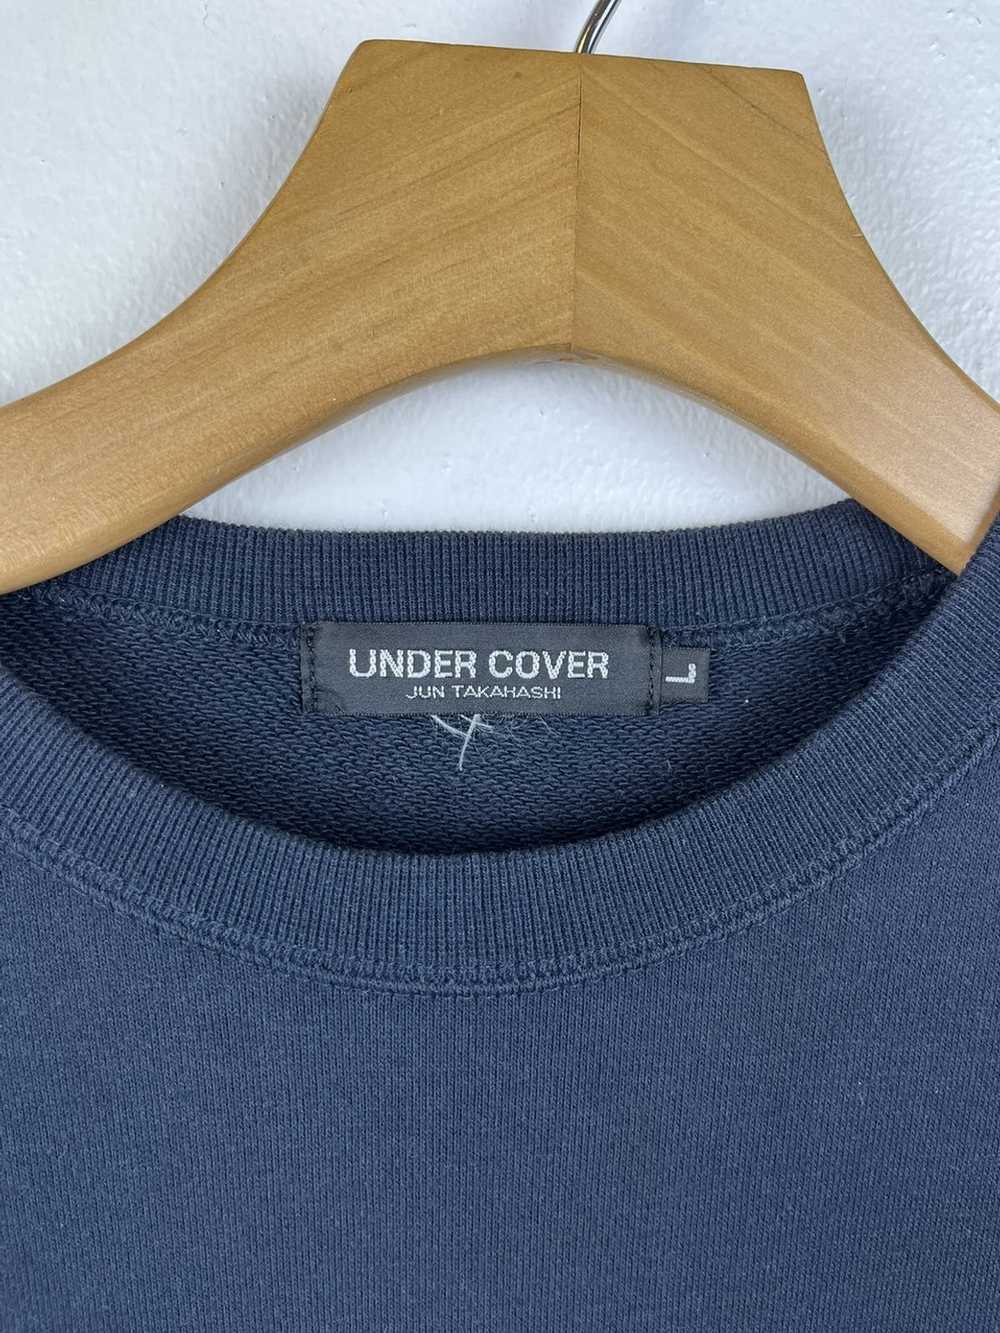 Undercover Undercover Anarchy Sweater - image 3